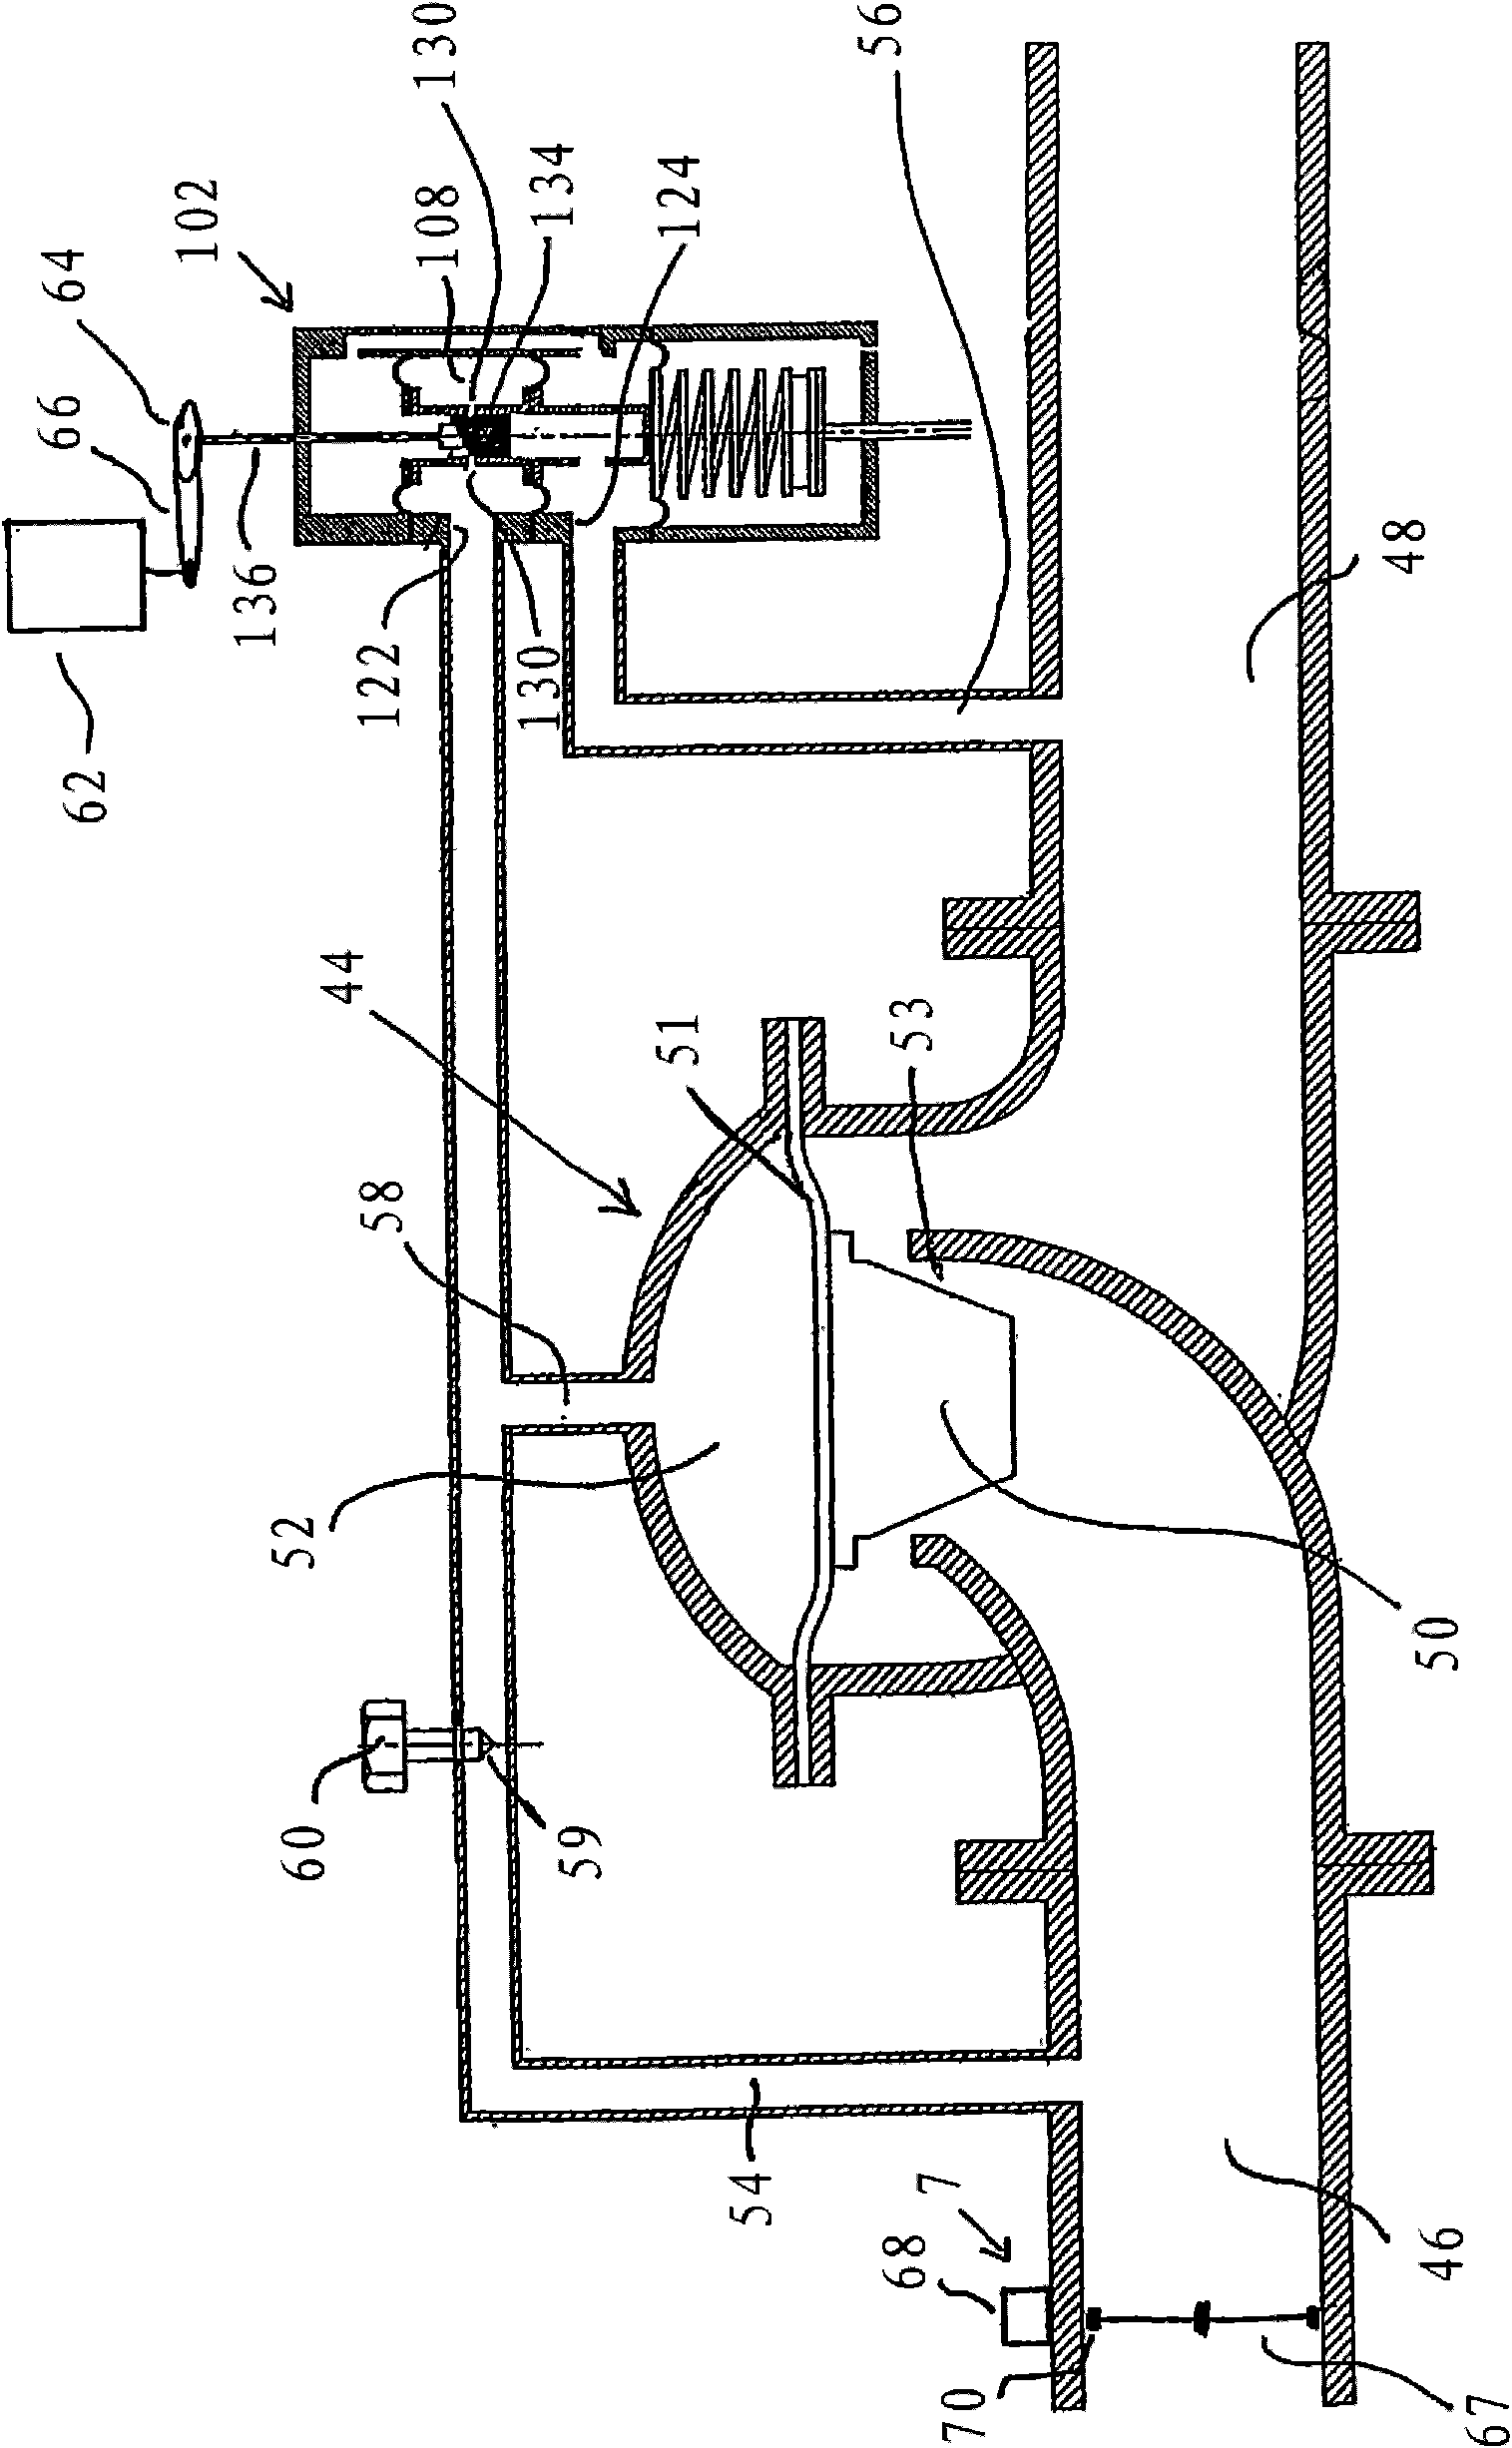 Controller and control system for a pressure reducing valve